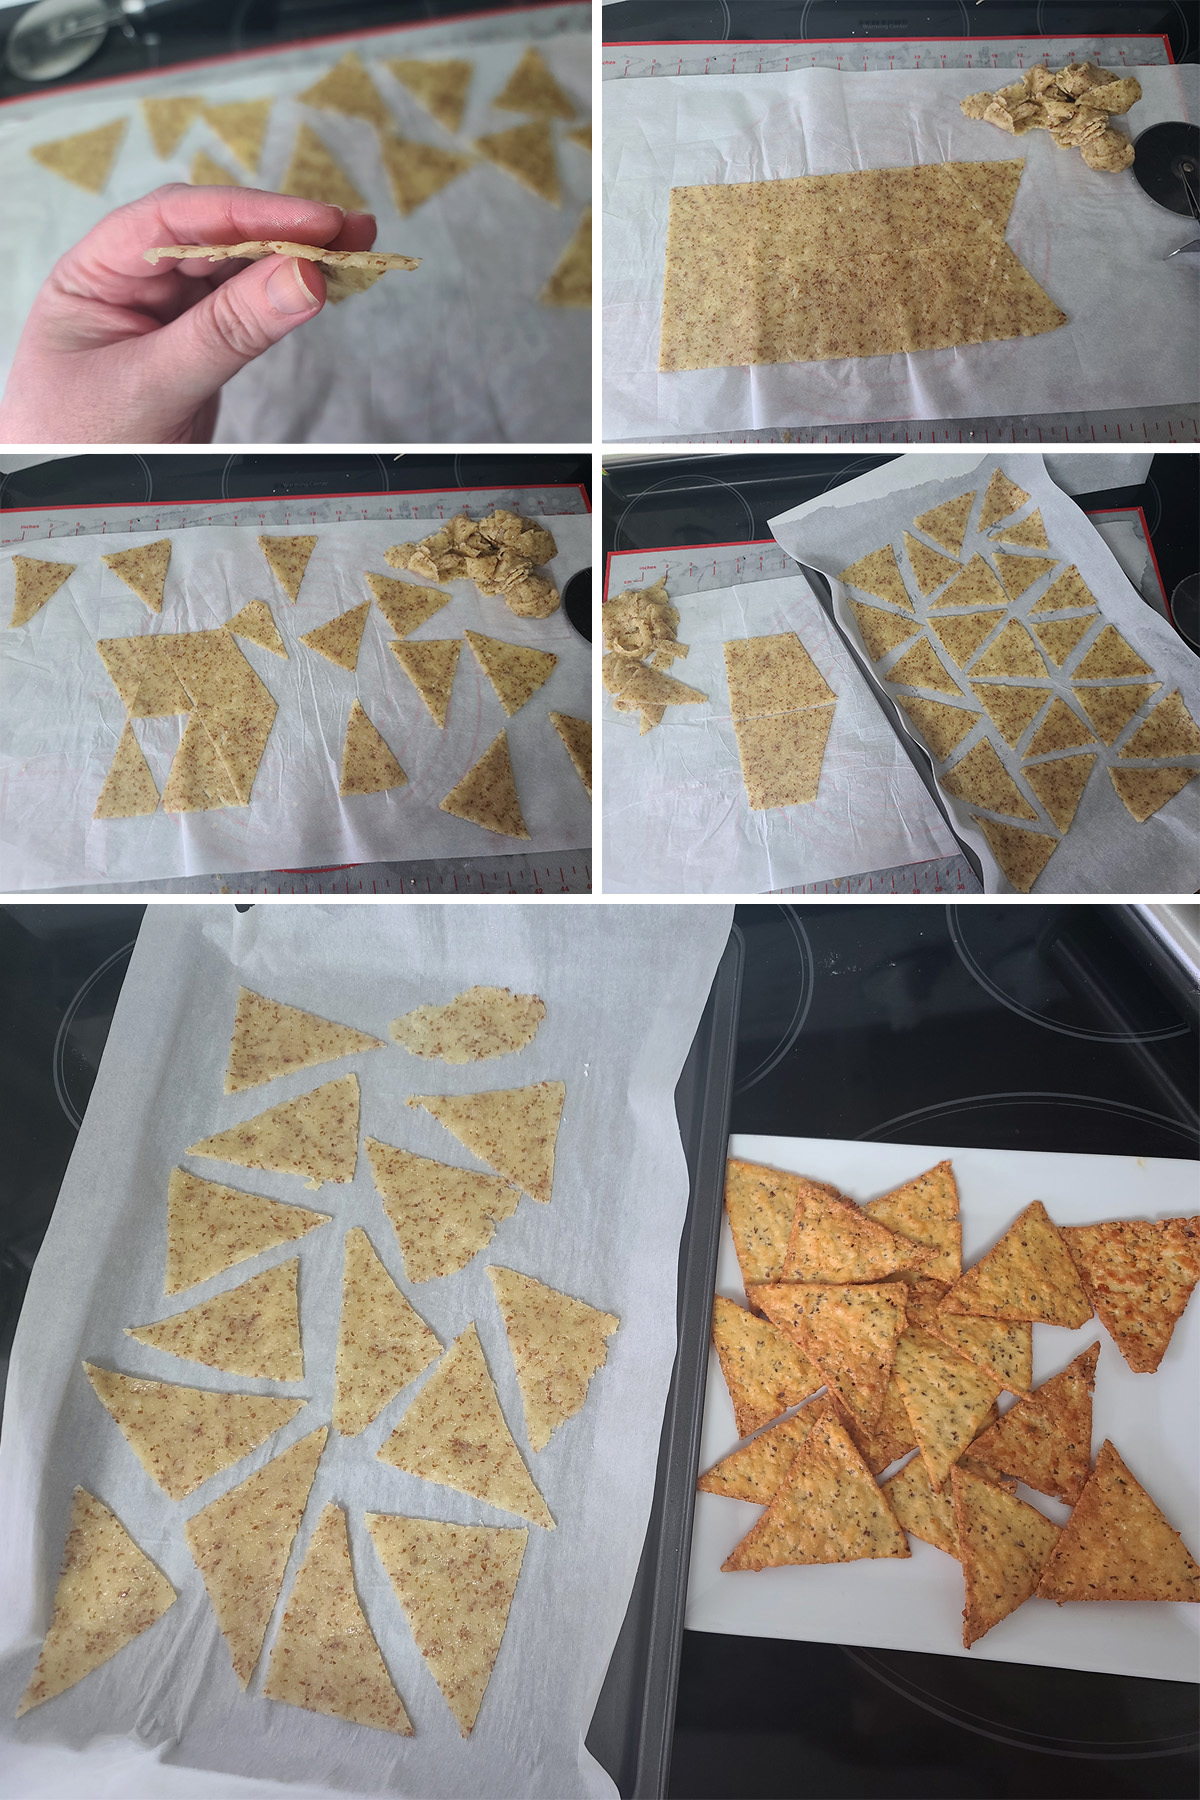 A 5 part image showing the cut tortilla chips being put on prepared pans and baked.